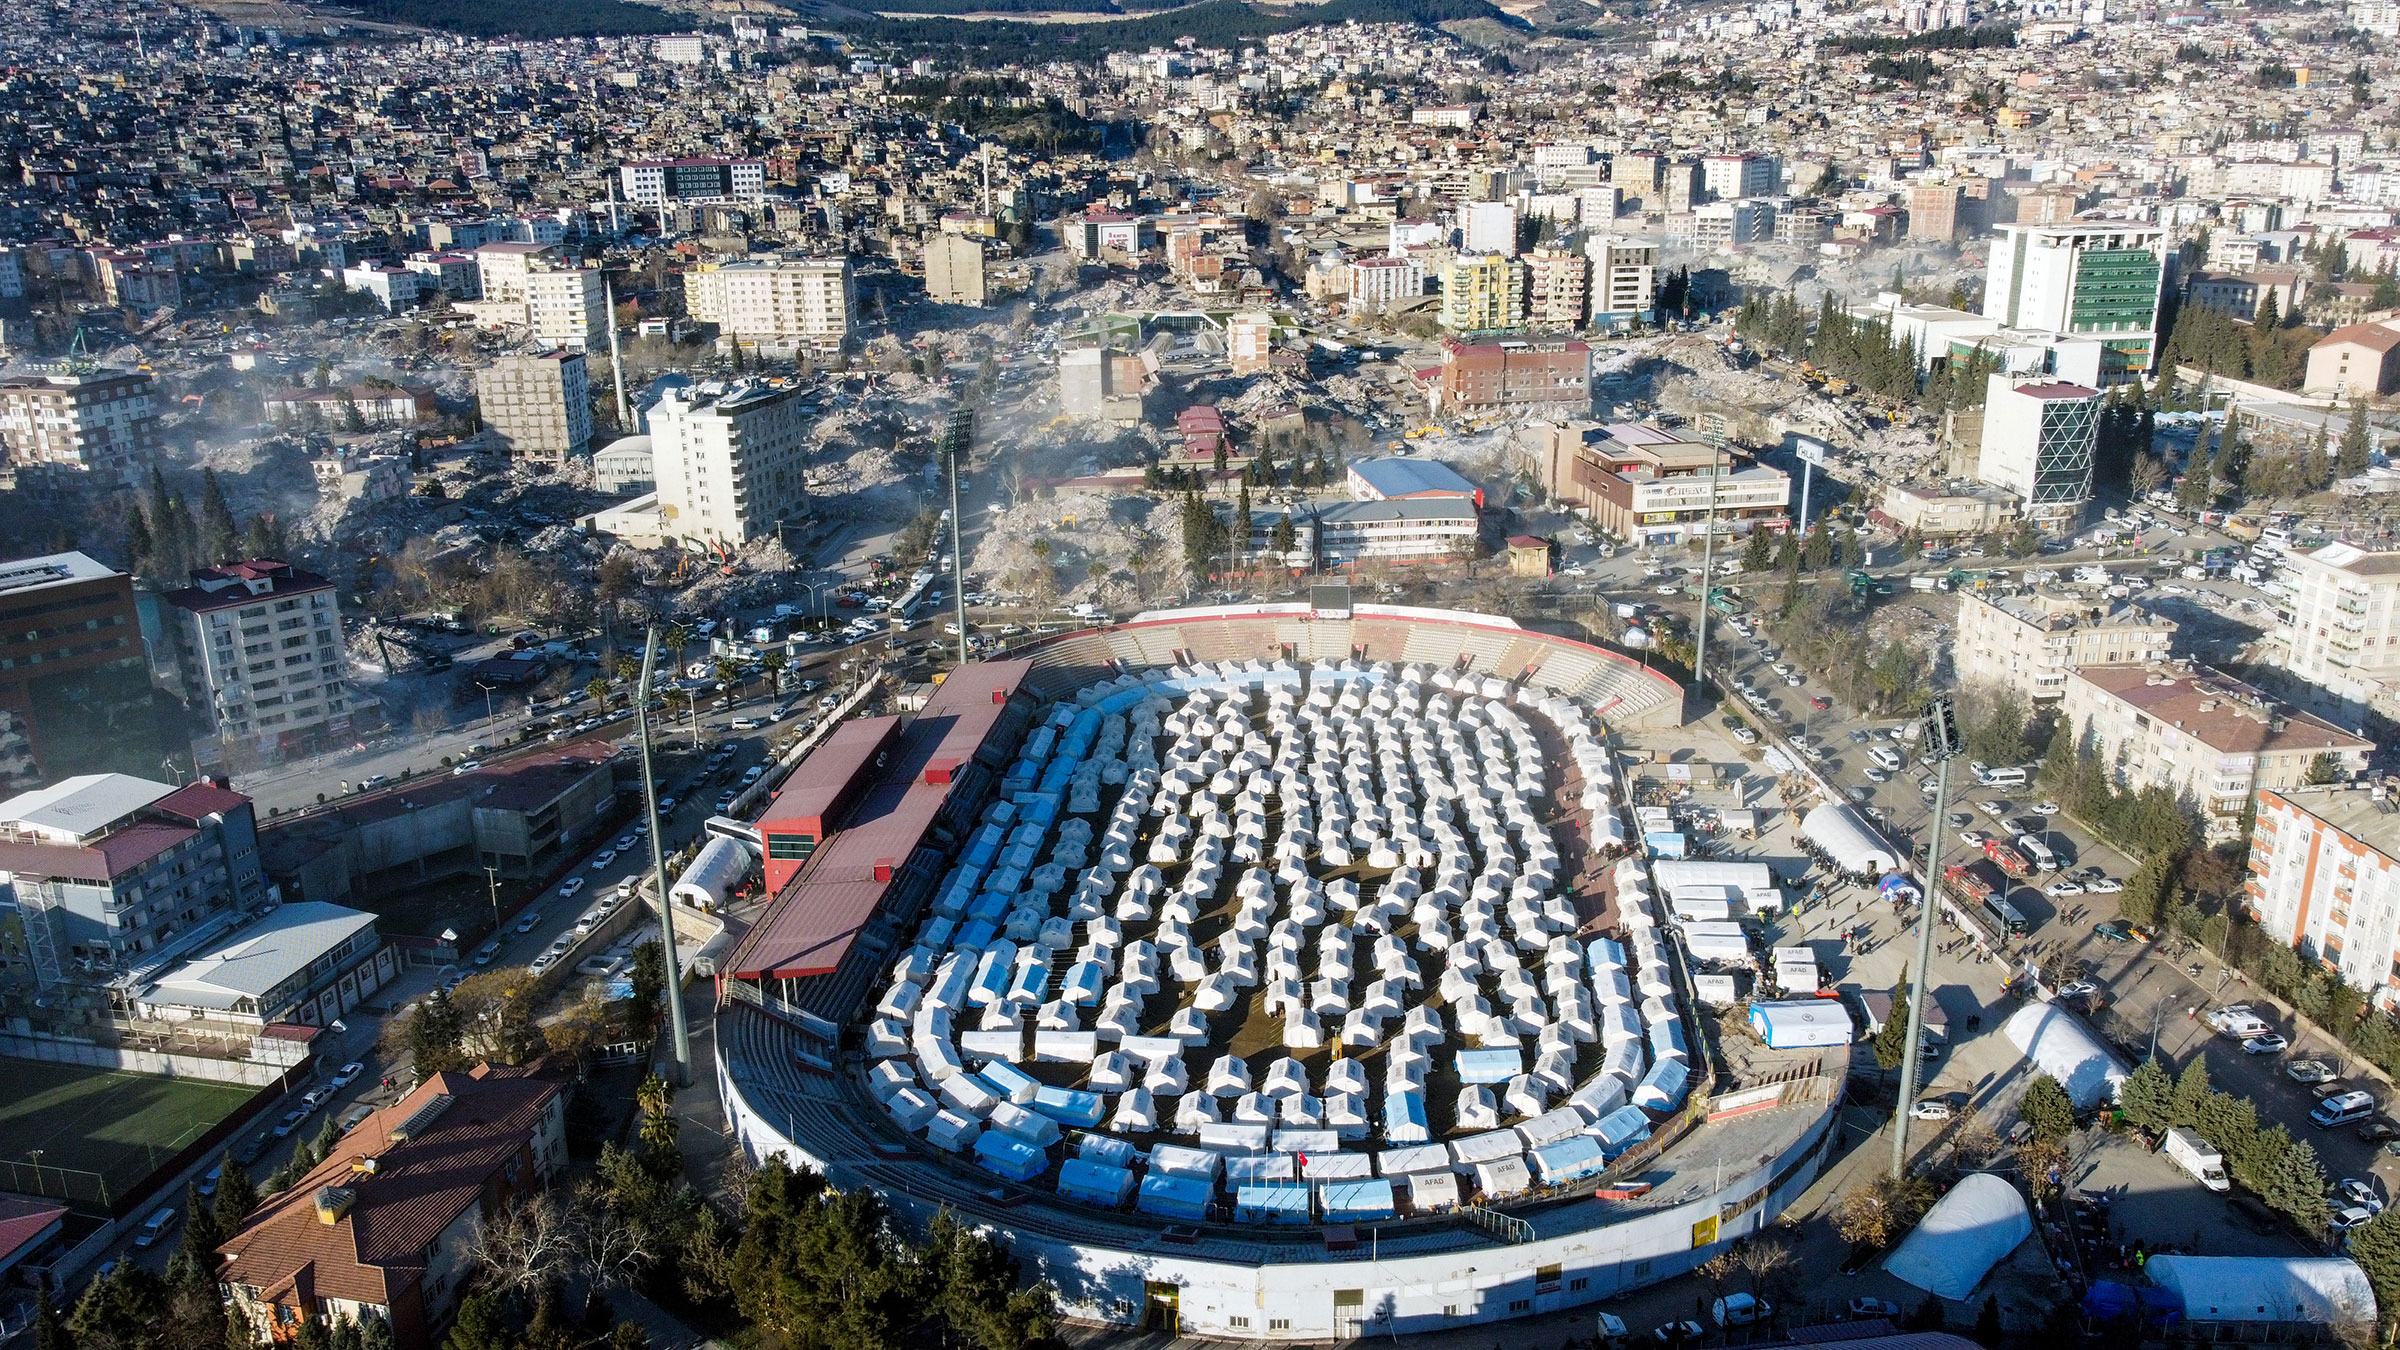 A view of 12 Subat Stadium after tents set up by the Turkish Disaster Management Agency (AFAD) for earthquake victims, in the city center of Kahramanmaras on Feb. 15, 2023.